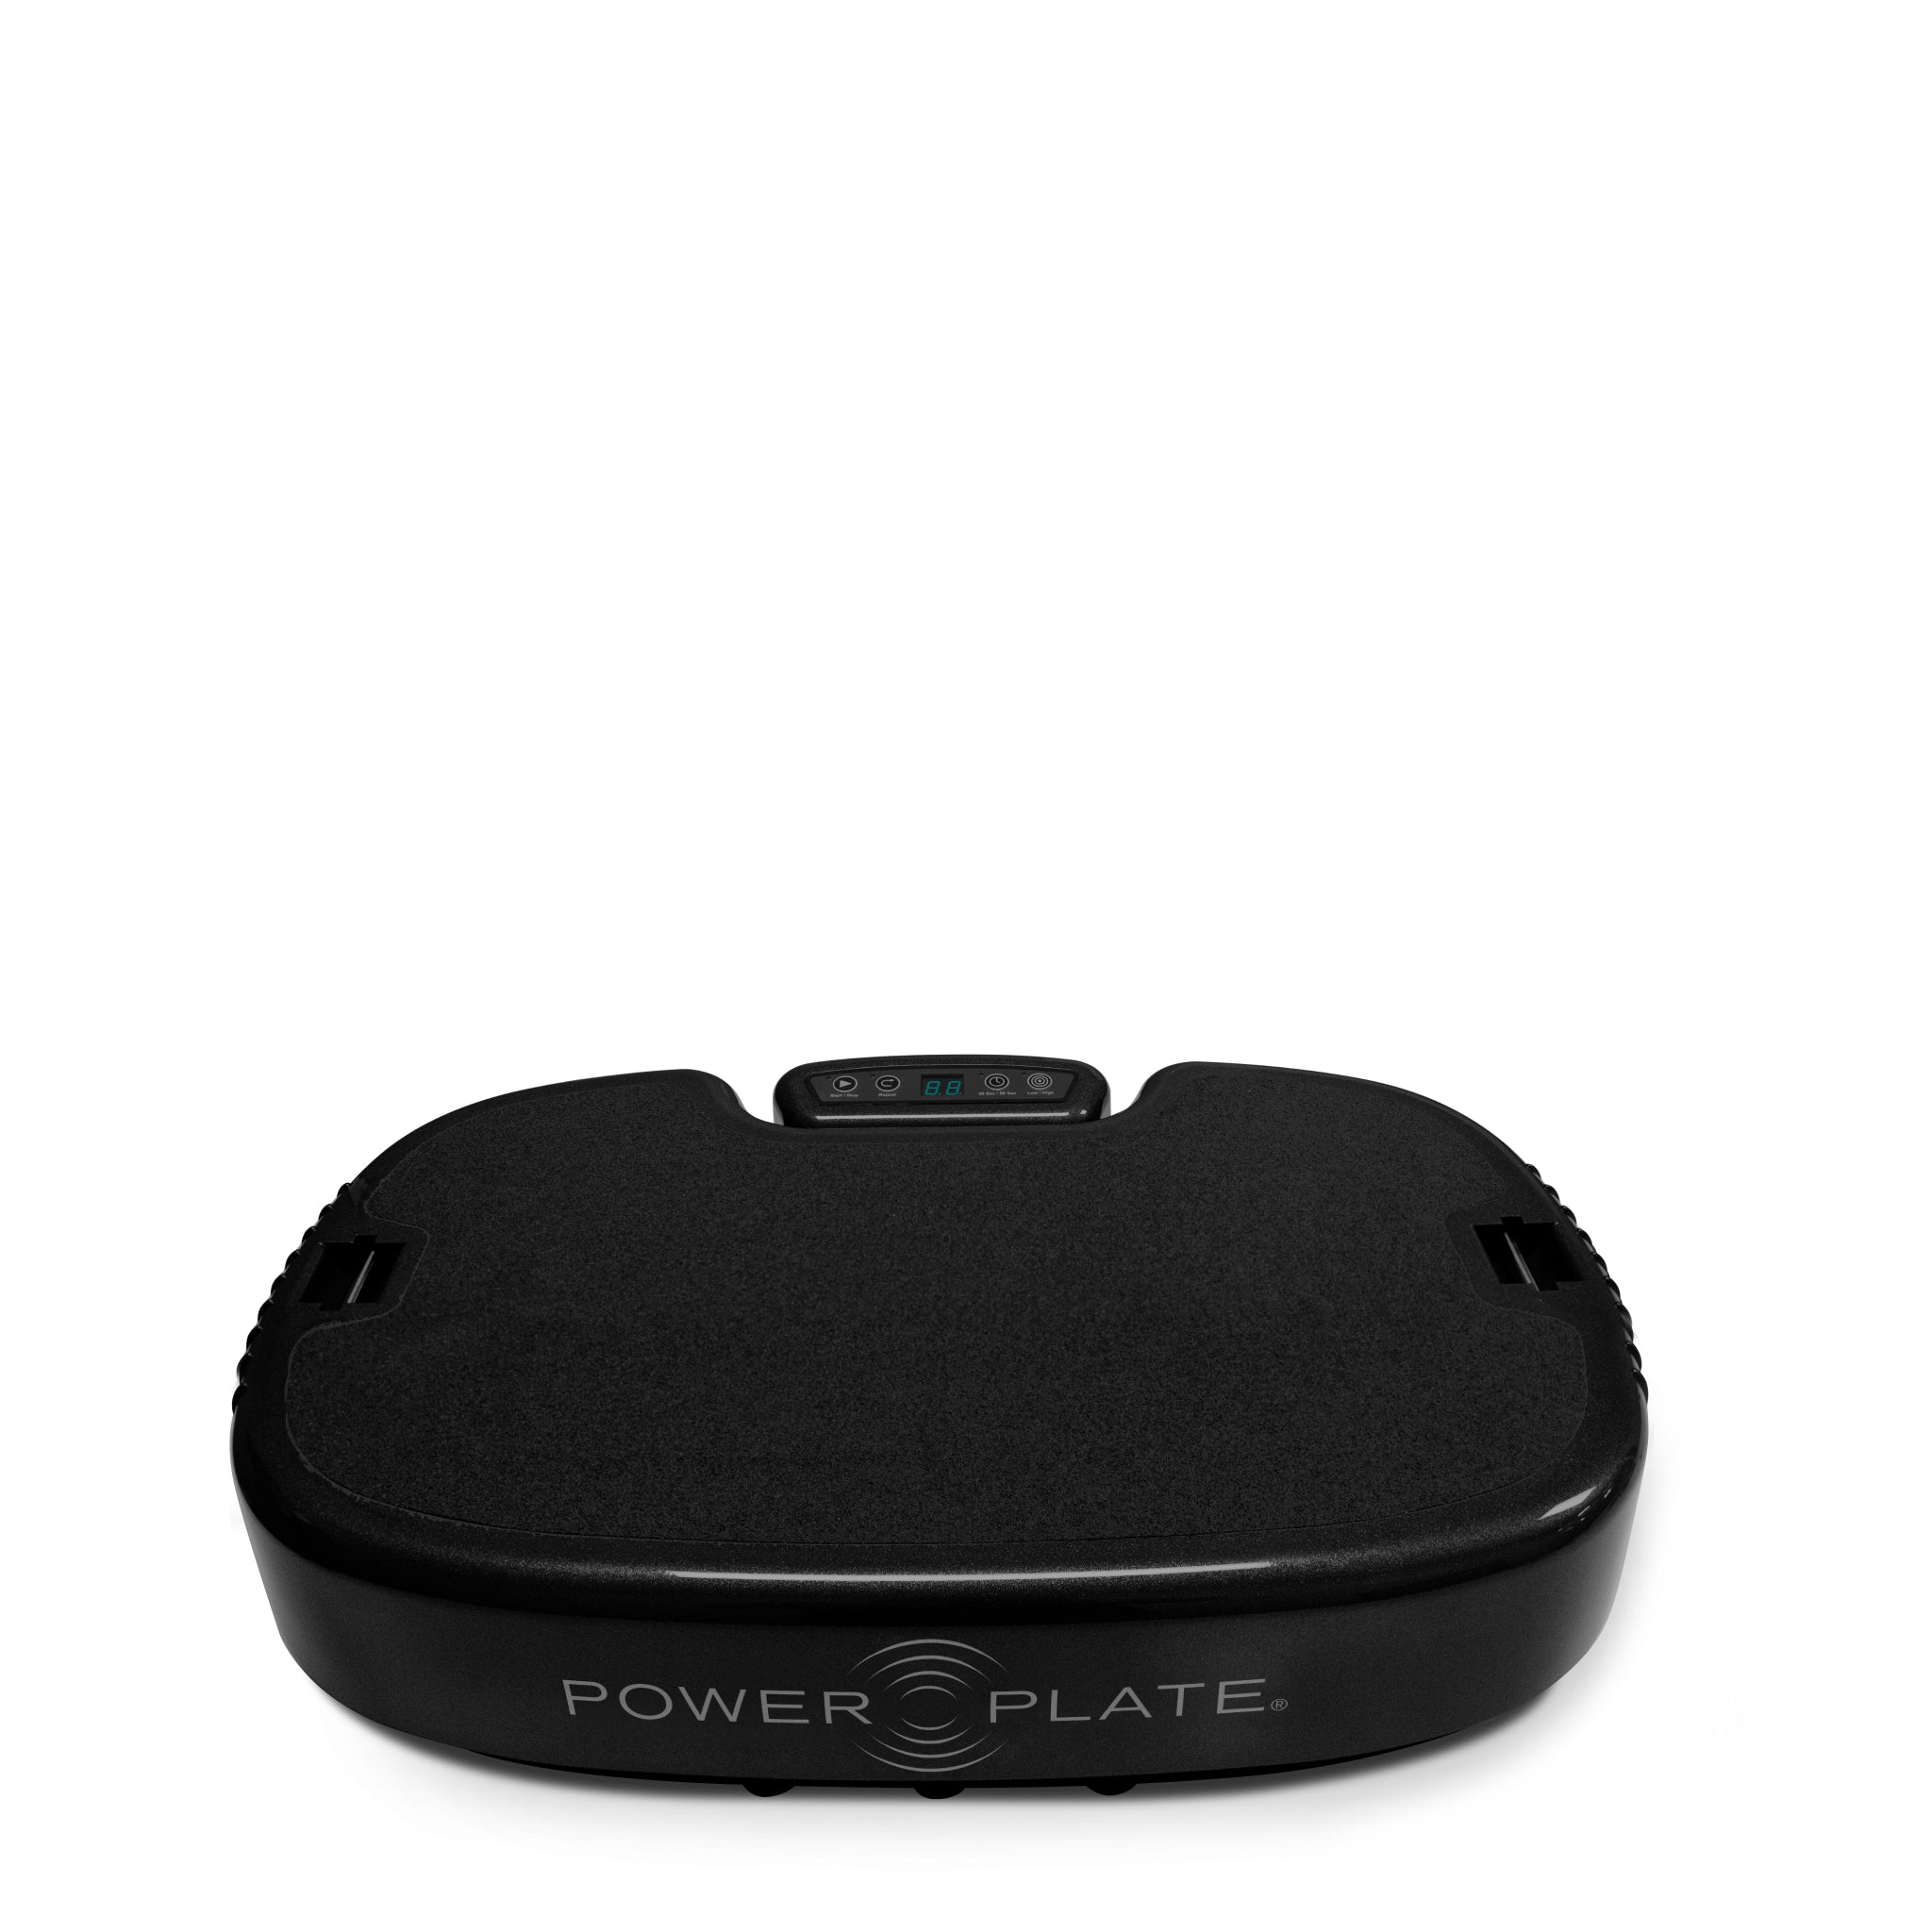 Personal Power Plate - Power Plate Whole Body Vibration | Power Plate